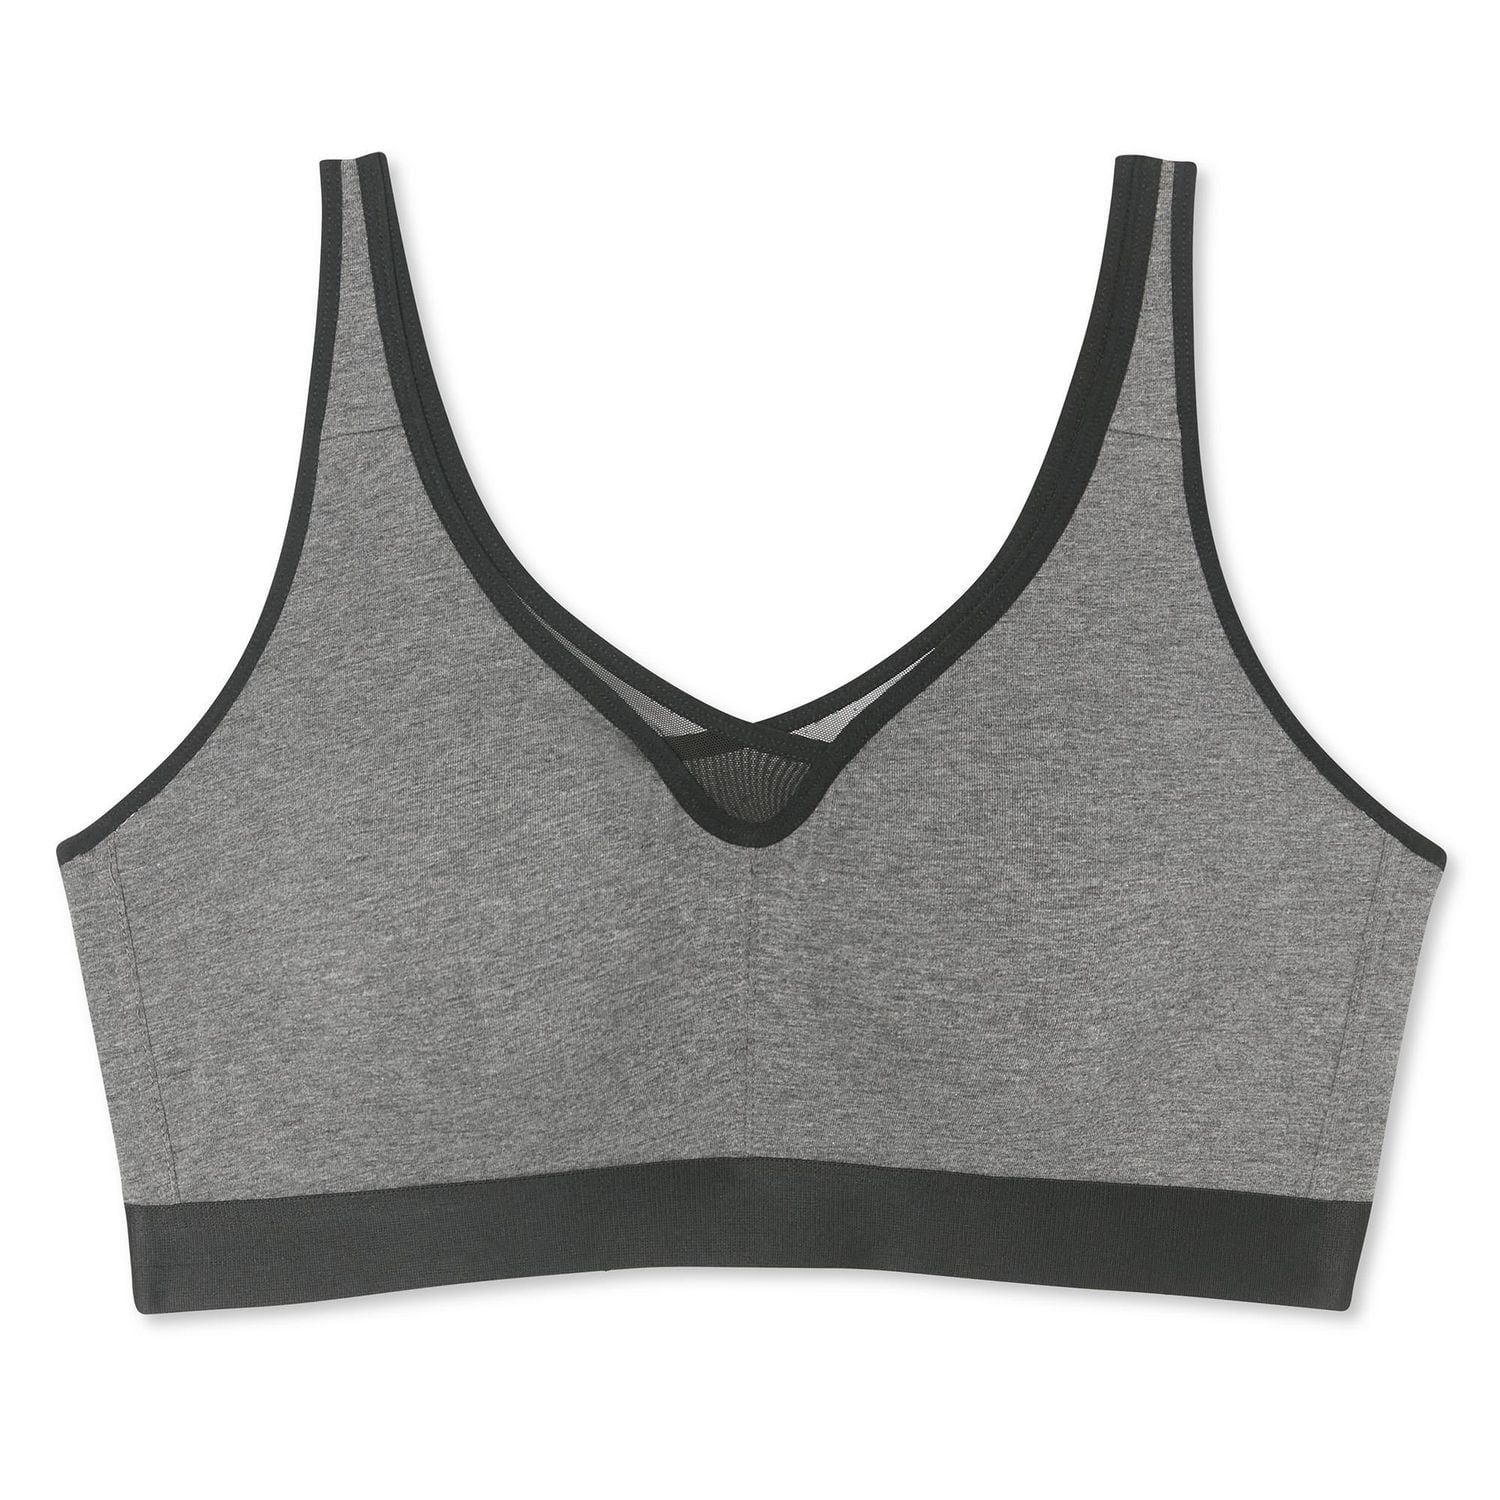 Flow Y Wrap Front High Neck Bra (8, Black) paired with Brown Earth